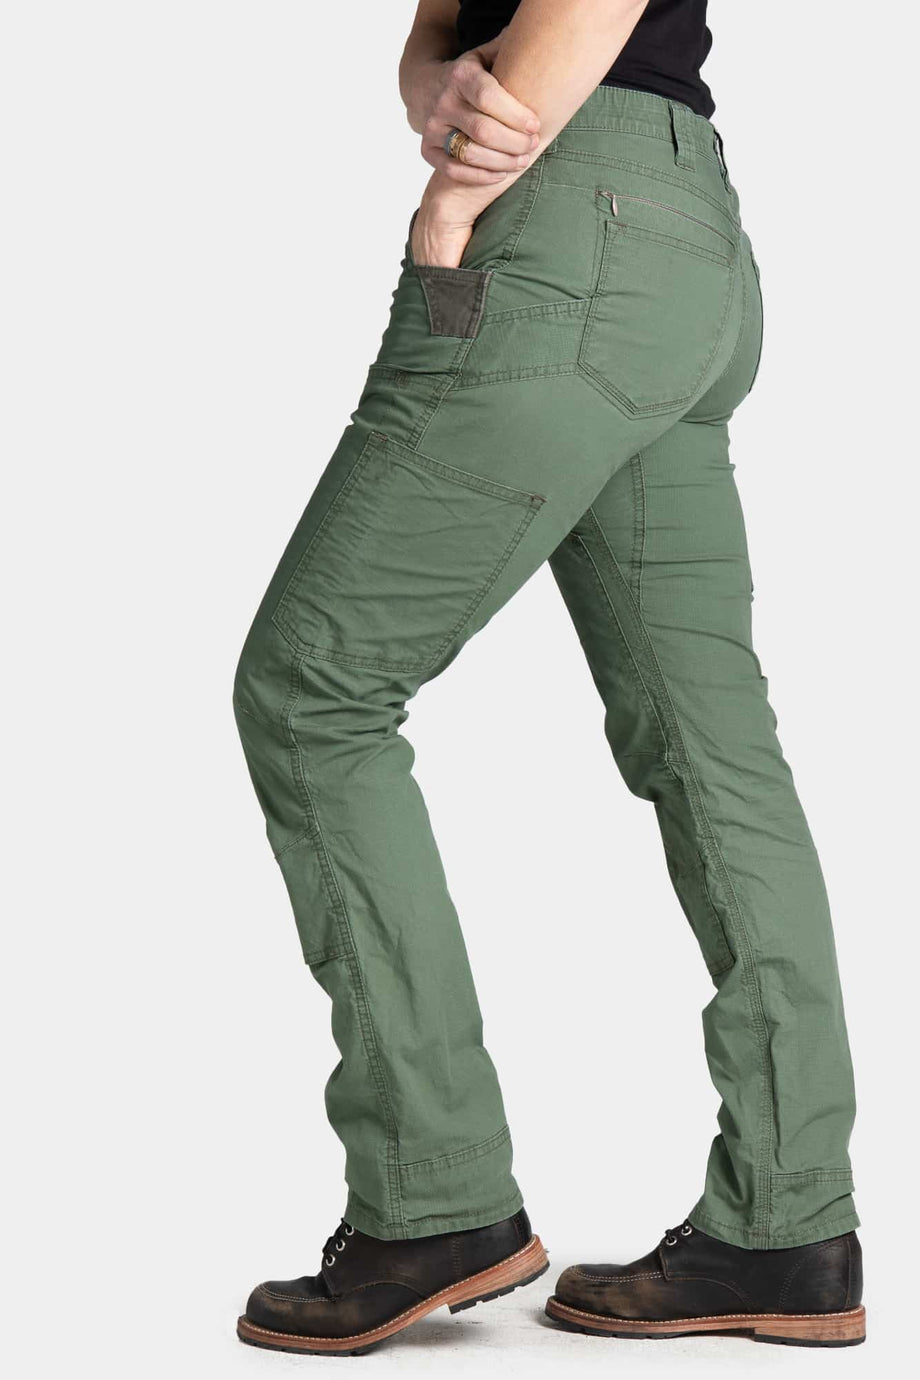 Women's Ripstop Pant Army Green - We're Outside Outdoor Outfitters